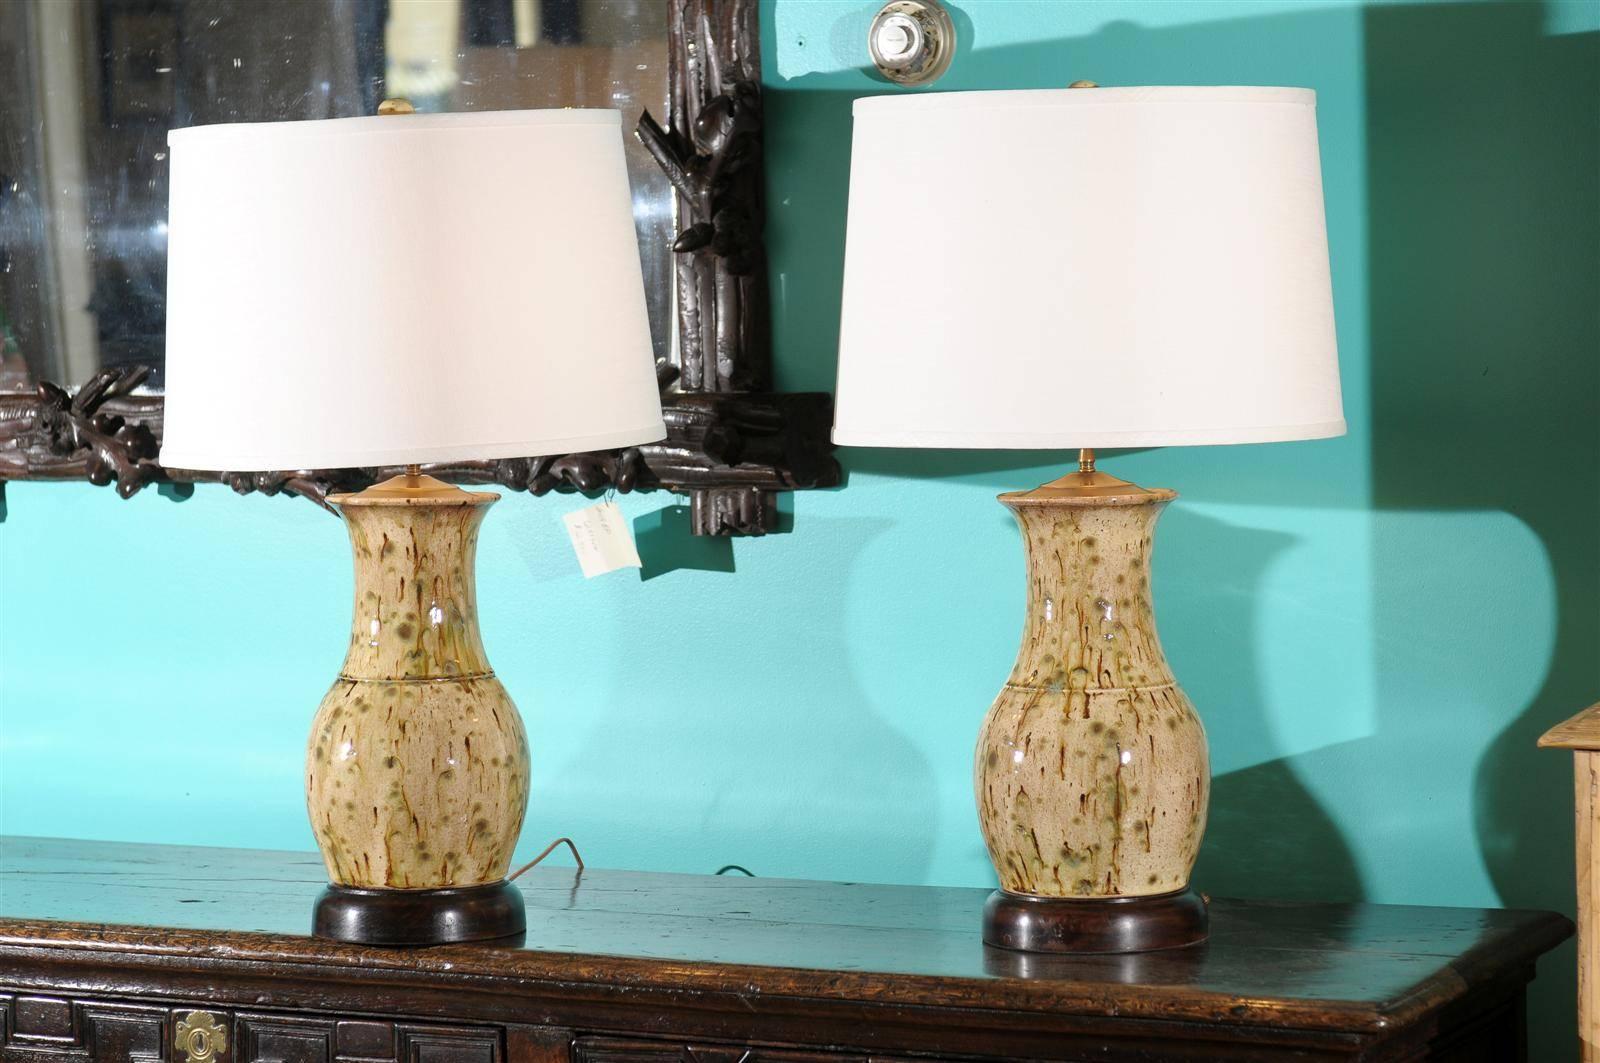 This beautiful pair of lamps are made in North Georgia by local artist Charlie West. Charlie started his work as a potter in 1986. The beauty of his lamps is that each piece is unique. Each lamp is hand glazed with a matching finial. Additional